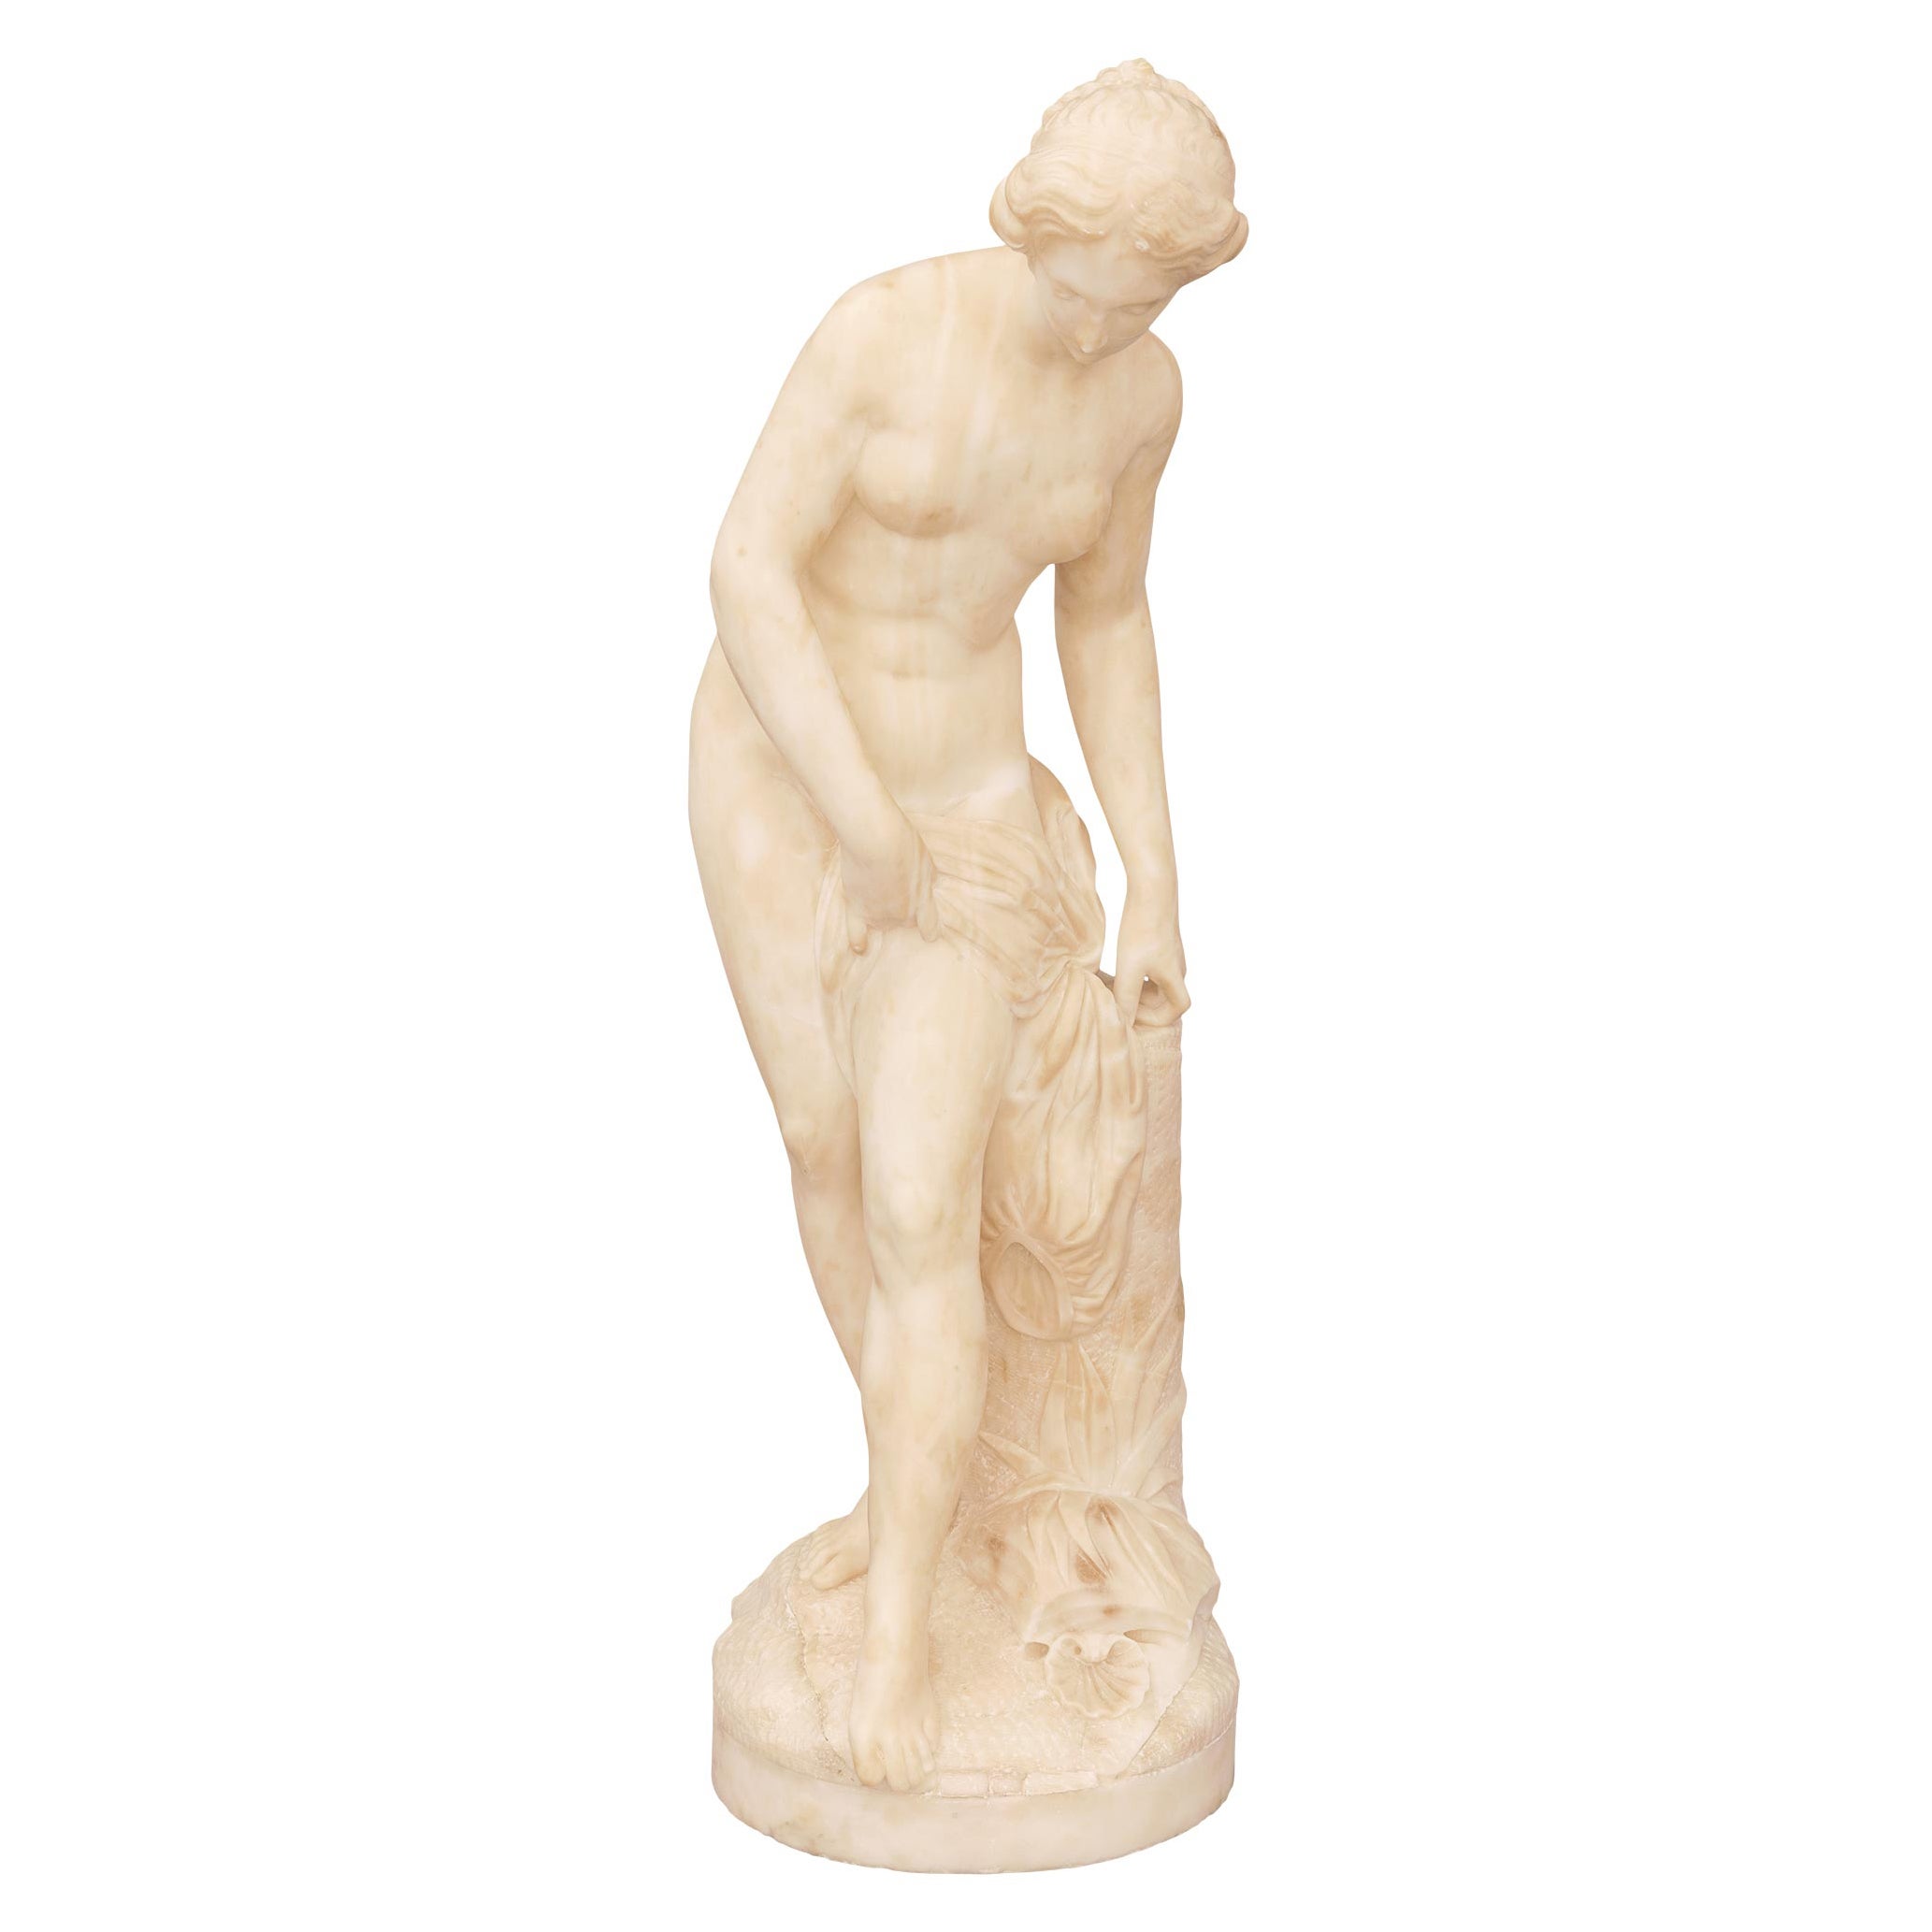 French 19th Century Alabaster Statue of 'La Baigneuse" After a Model by Falconet